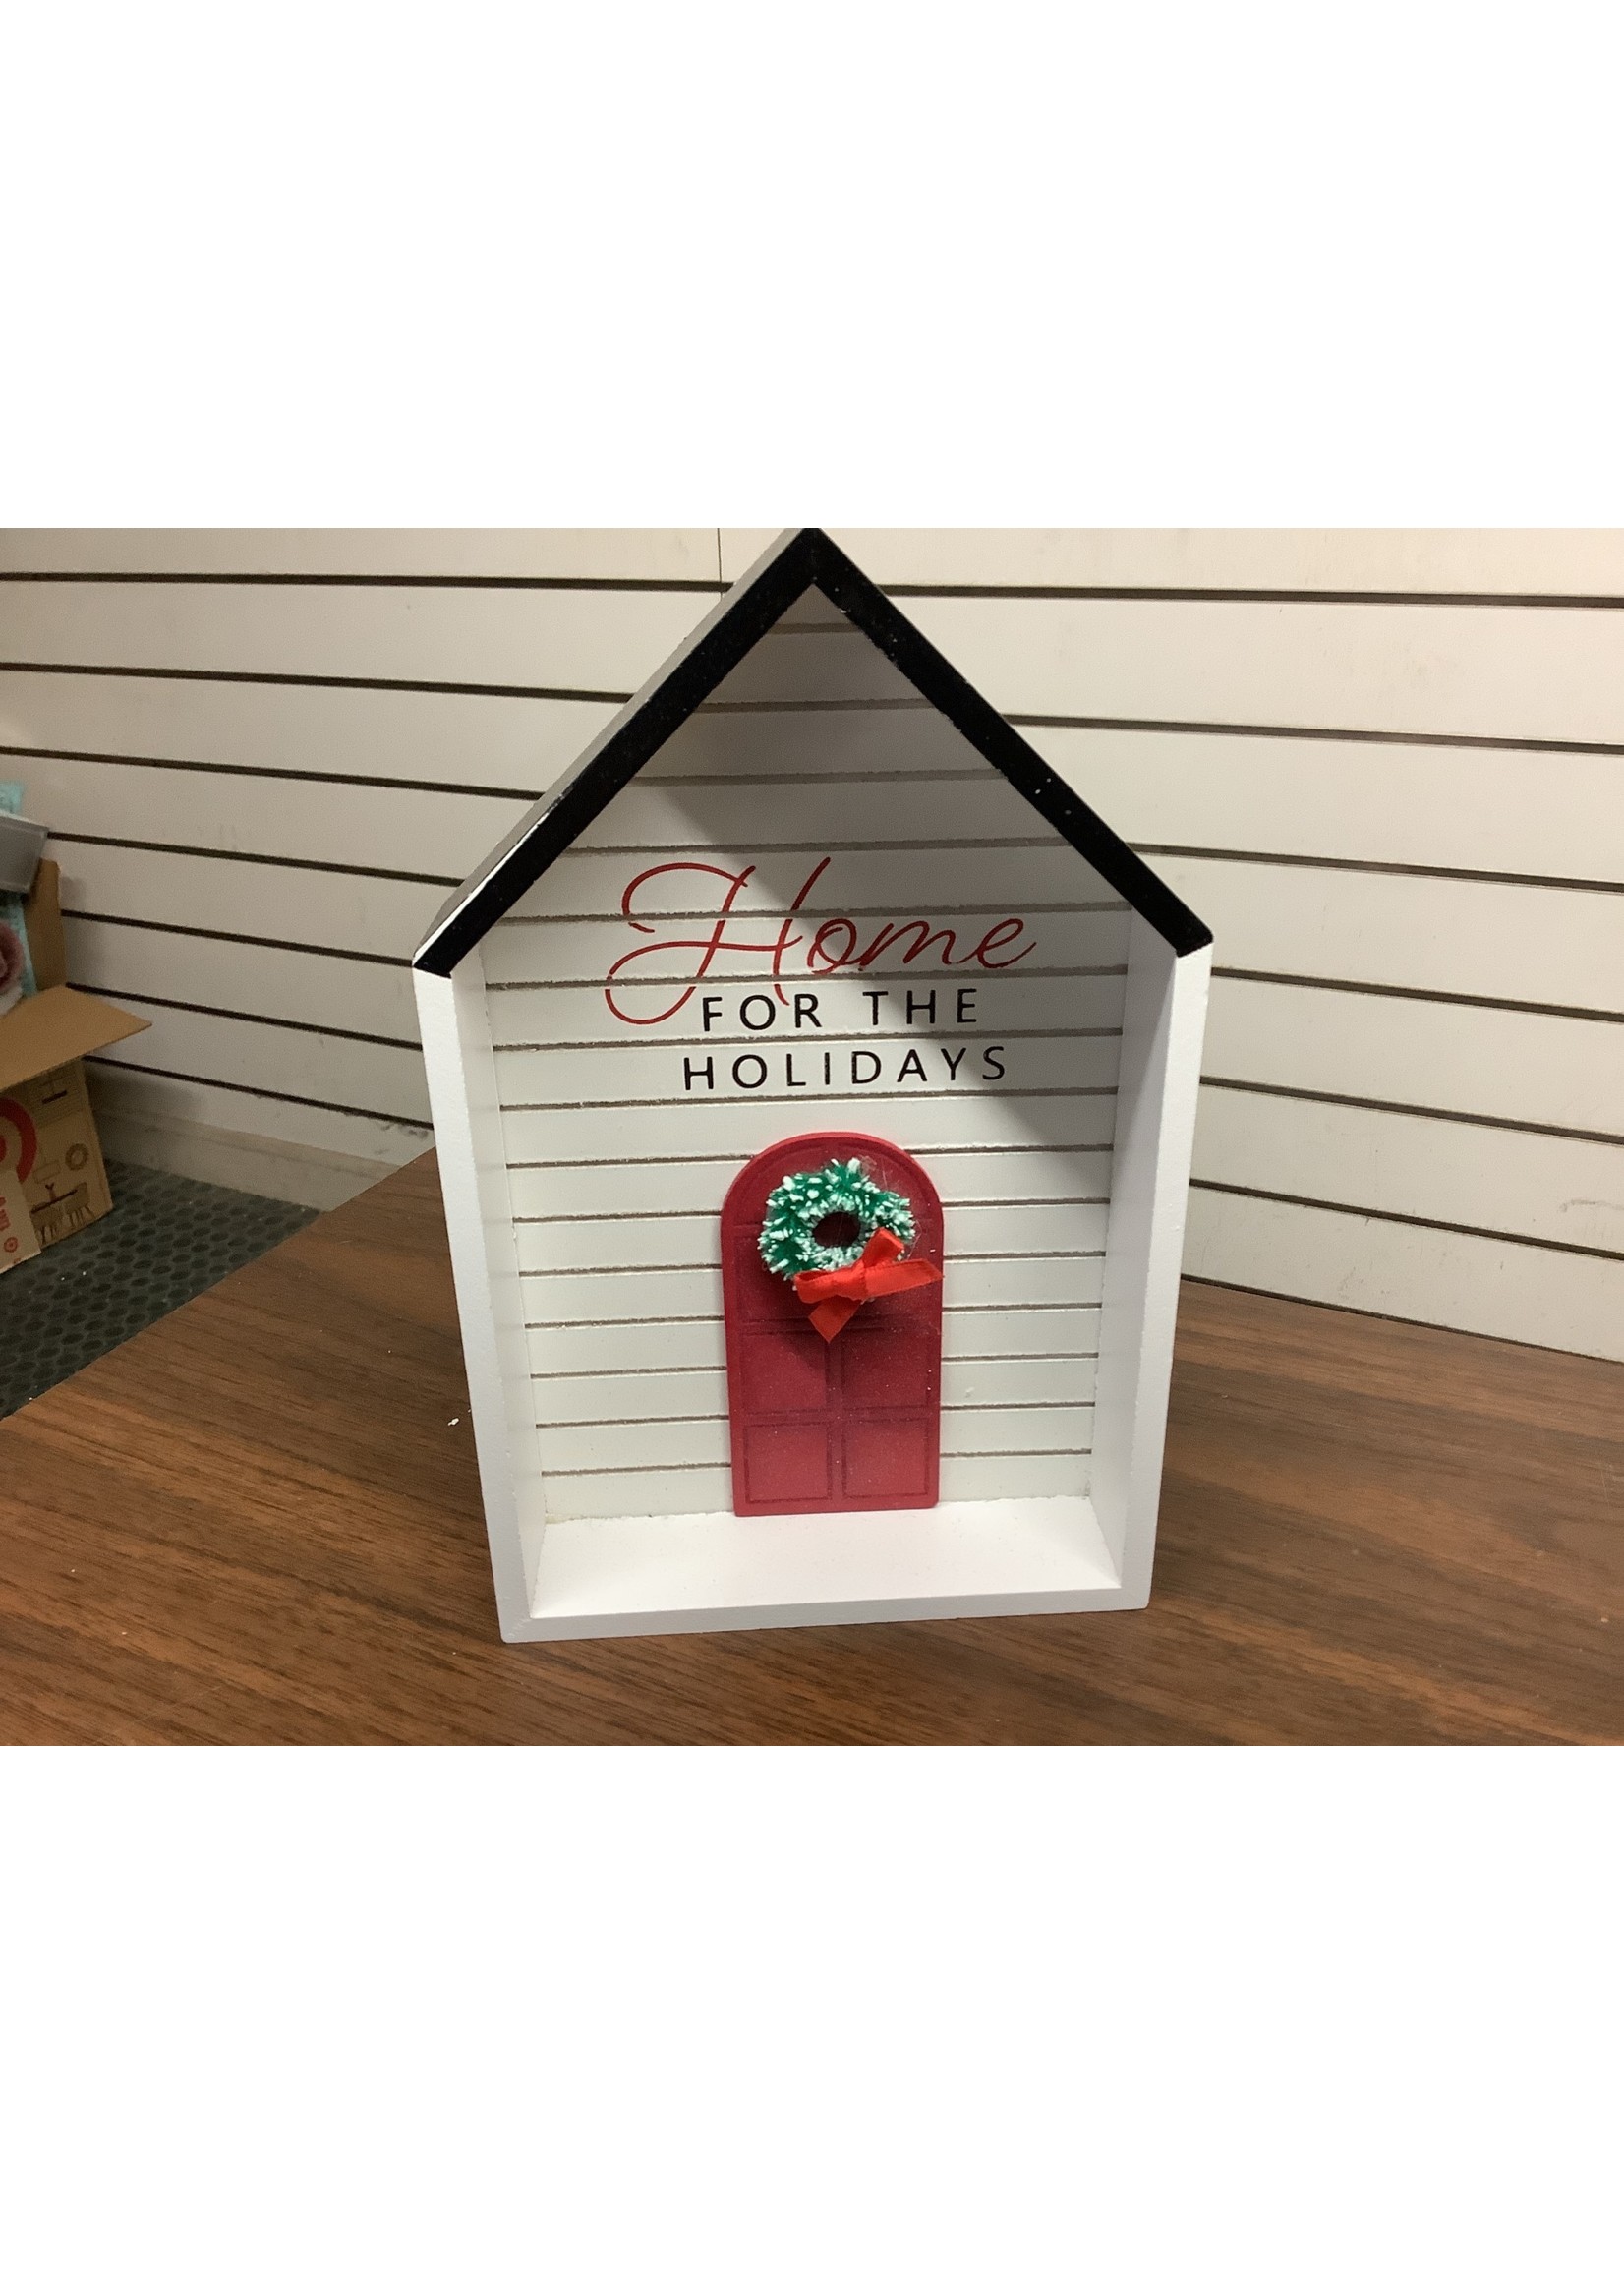 5”x8” Wooden Decor Home For The Holidays